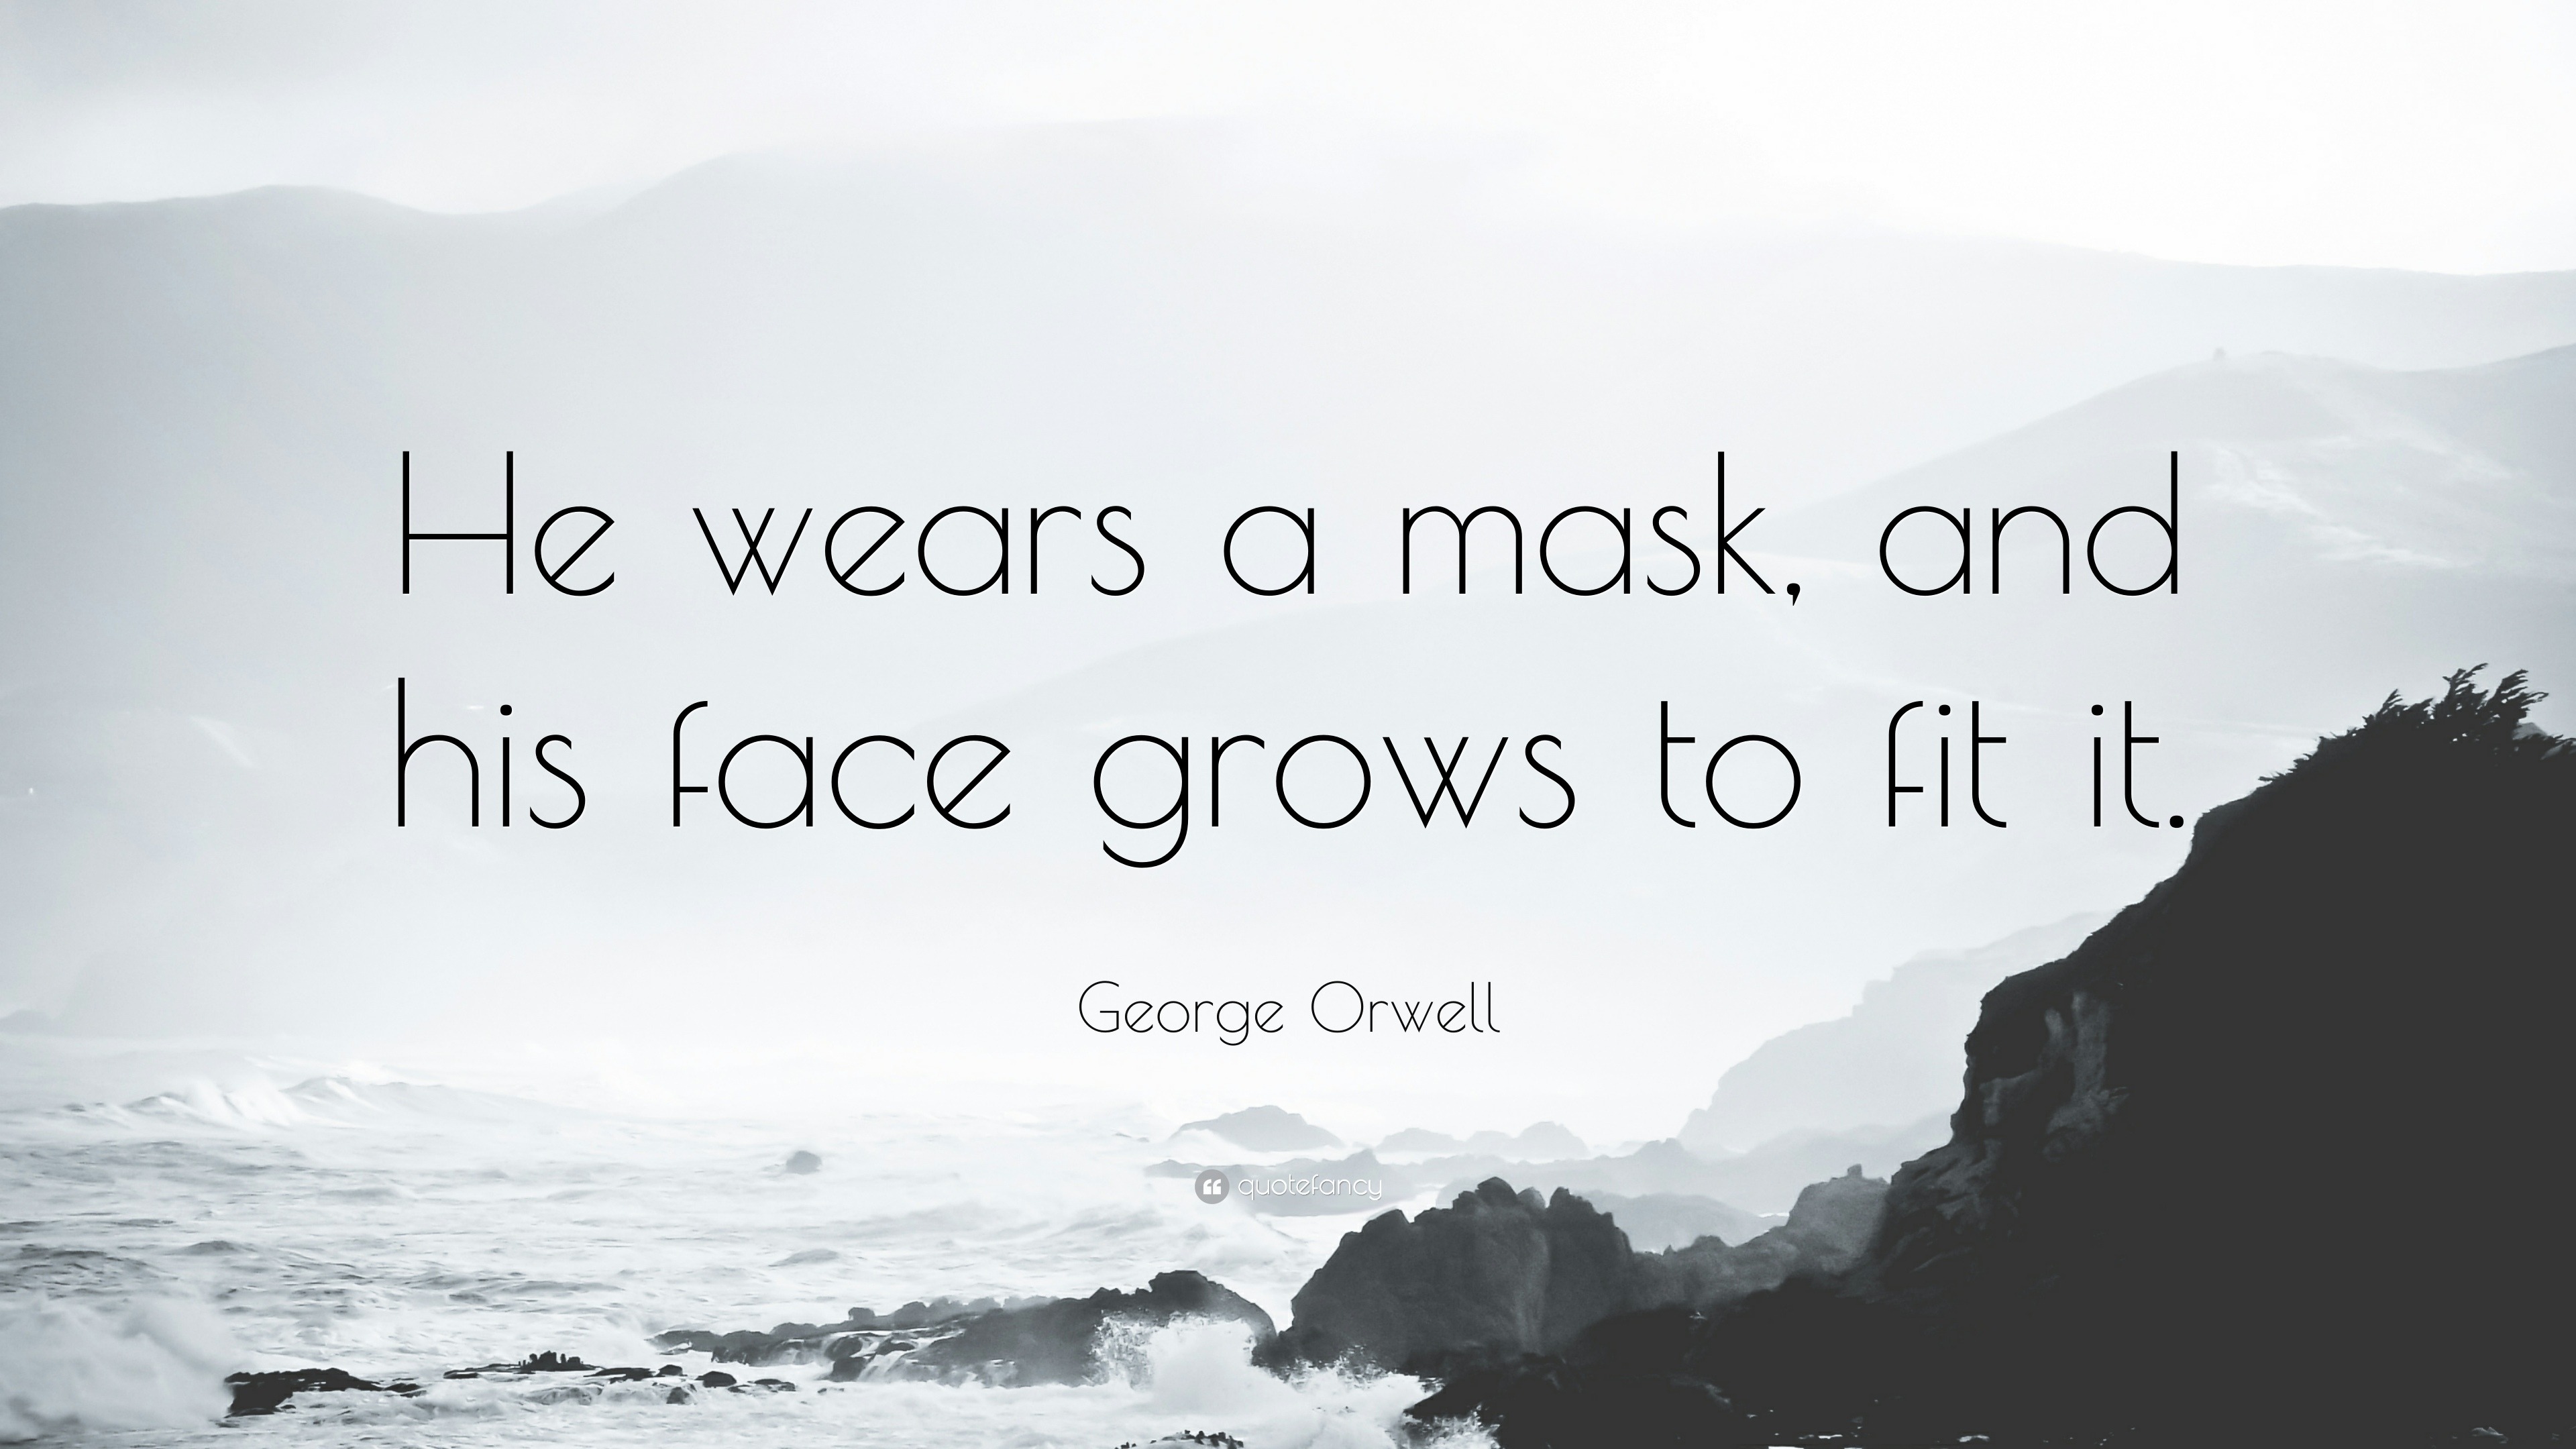 George Orwell Quote: "He wears a mask, and his face grows to fit it." (12 wallpapers) - Quotefancy